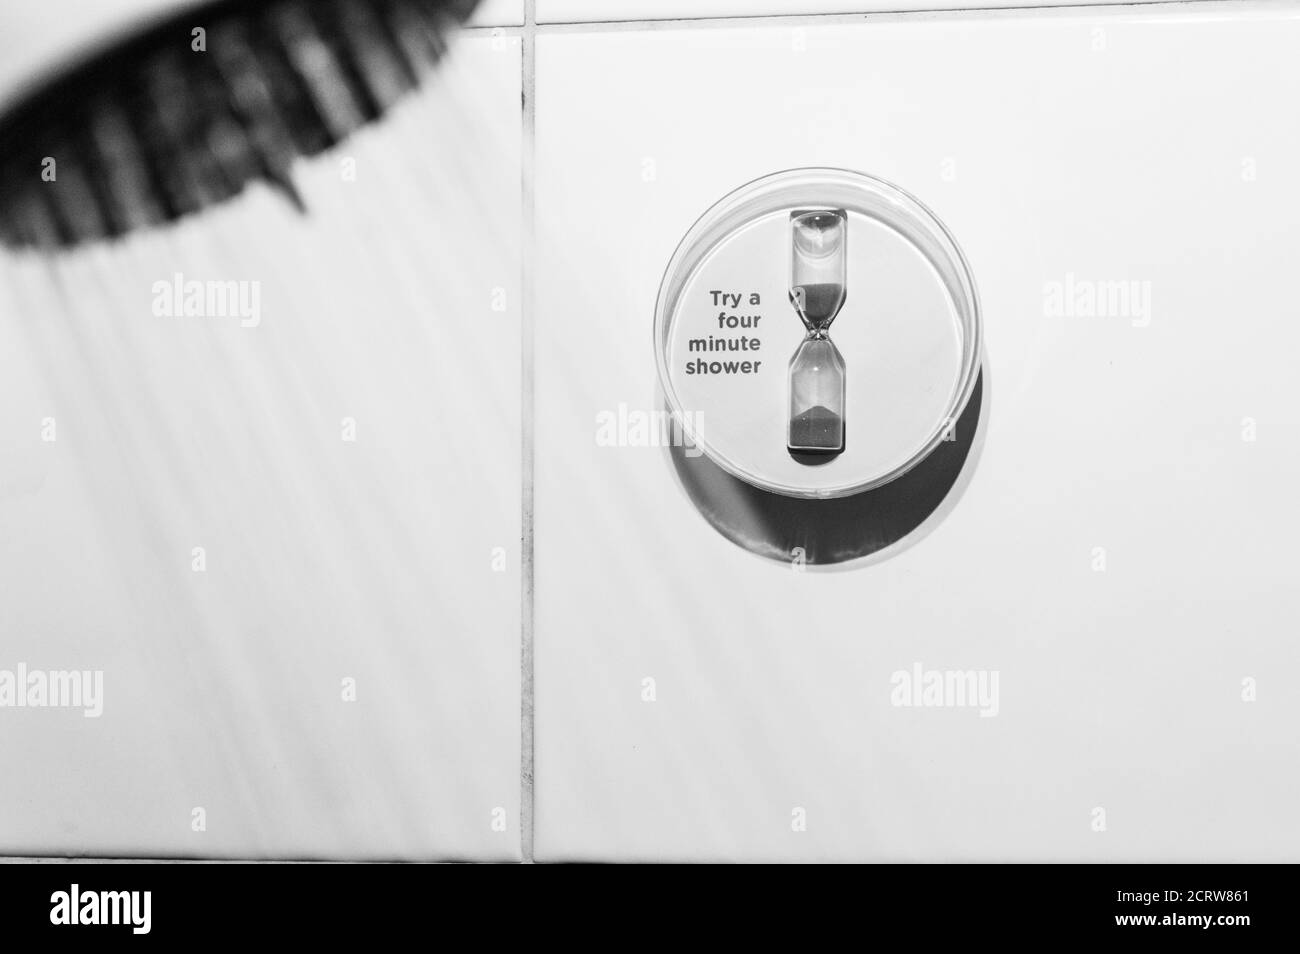 Save water four minute shower timer in monochrome Stock Photo